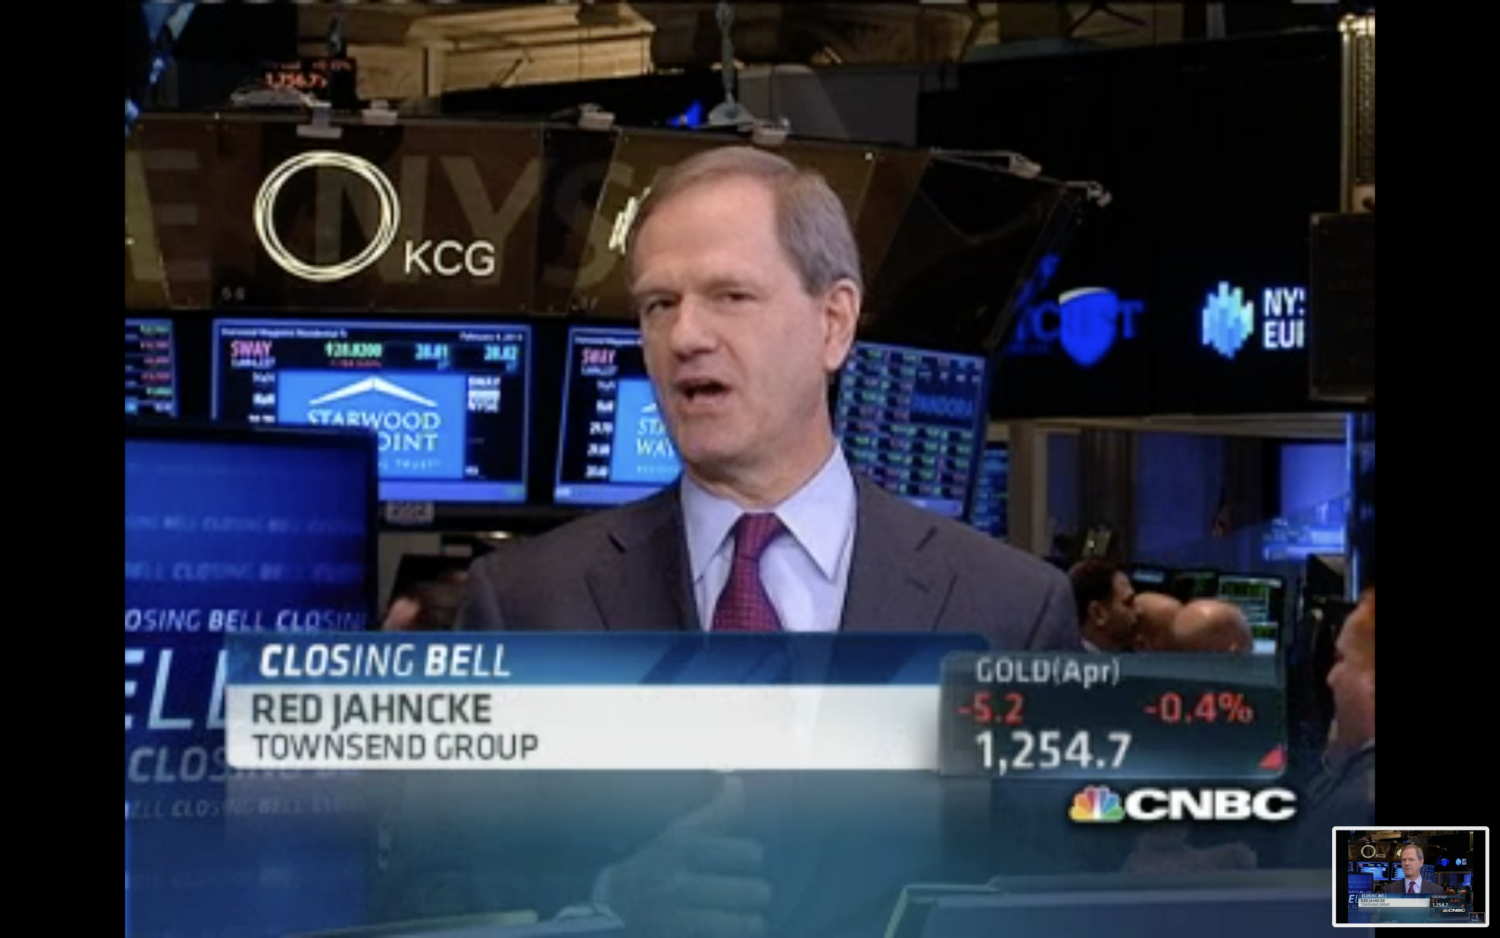 CNBC ‘Closing Bell’: Capital gains hike behind sell-off